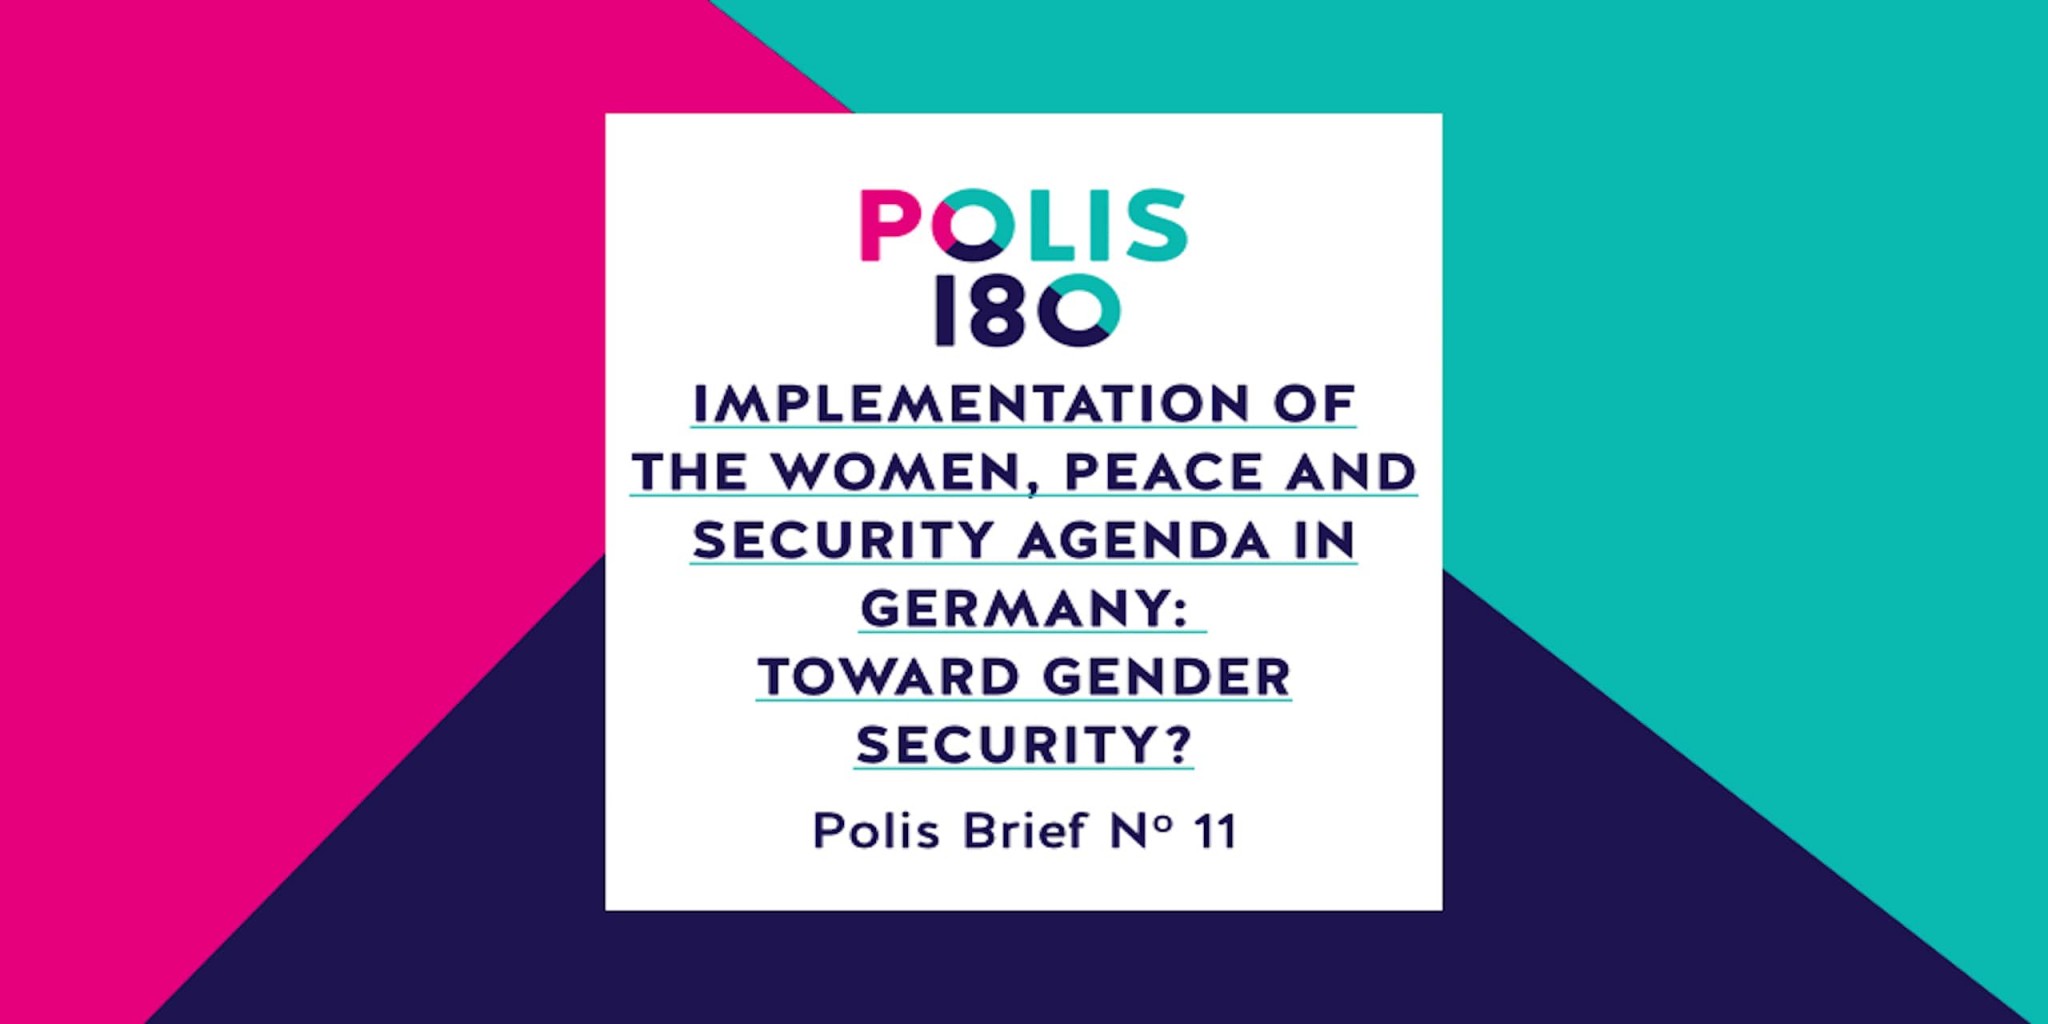 Merle Huber argues that until today, the Women, Peace and Security agenda has fallen short of fulfilling hopes for a transformation of gendered power relations and challenging the norms behind discriminatory practices in security policies. In her Polis Brief, she focuses on how Germany can include a stronger transformative approach in its next National Action Plan post-2020.